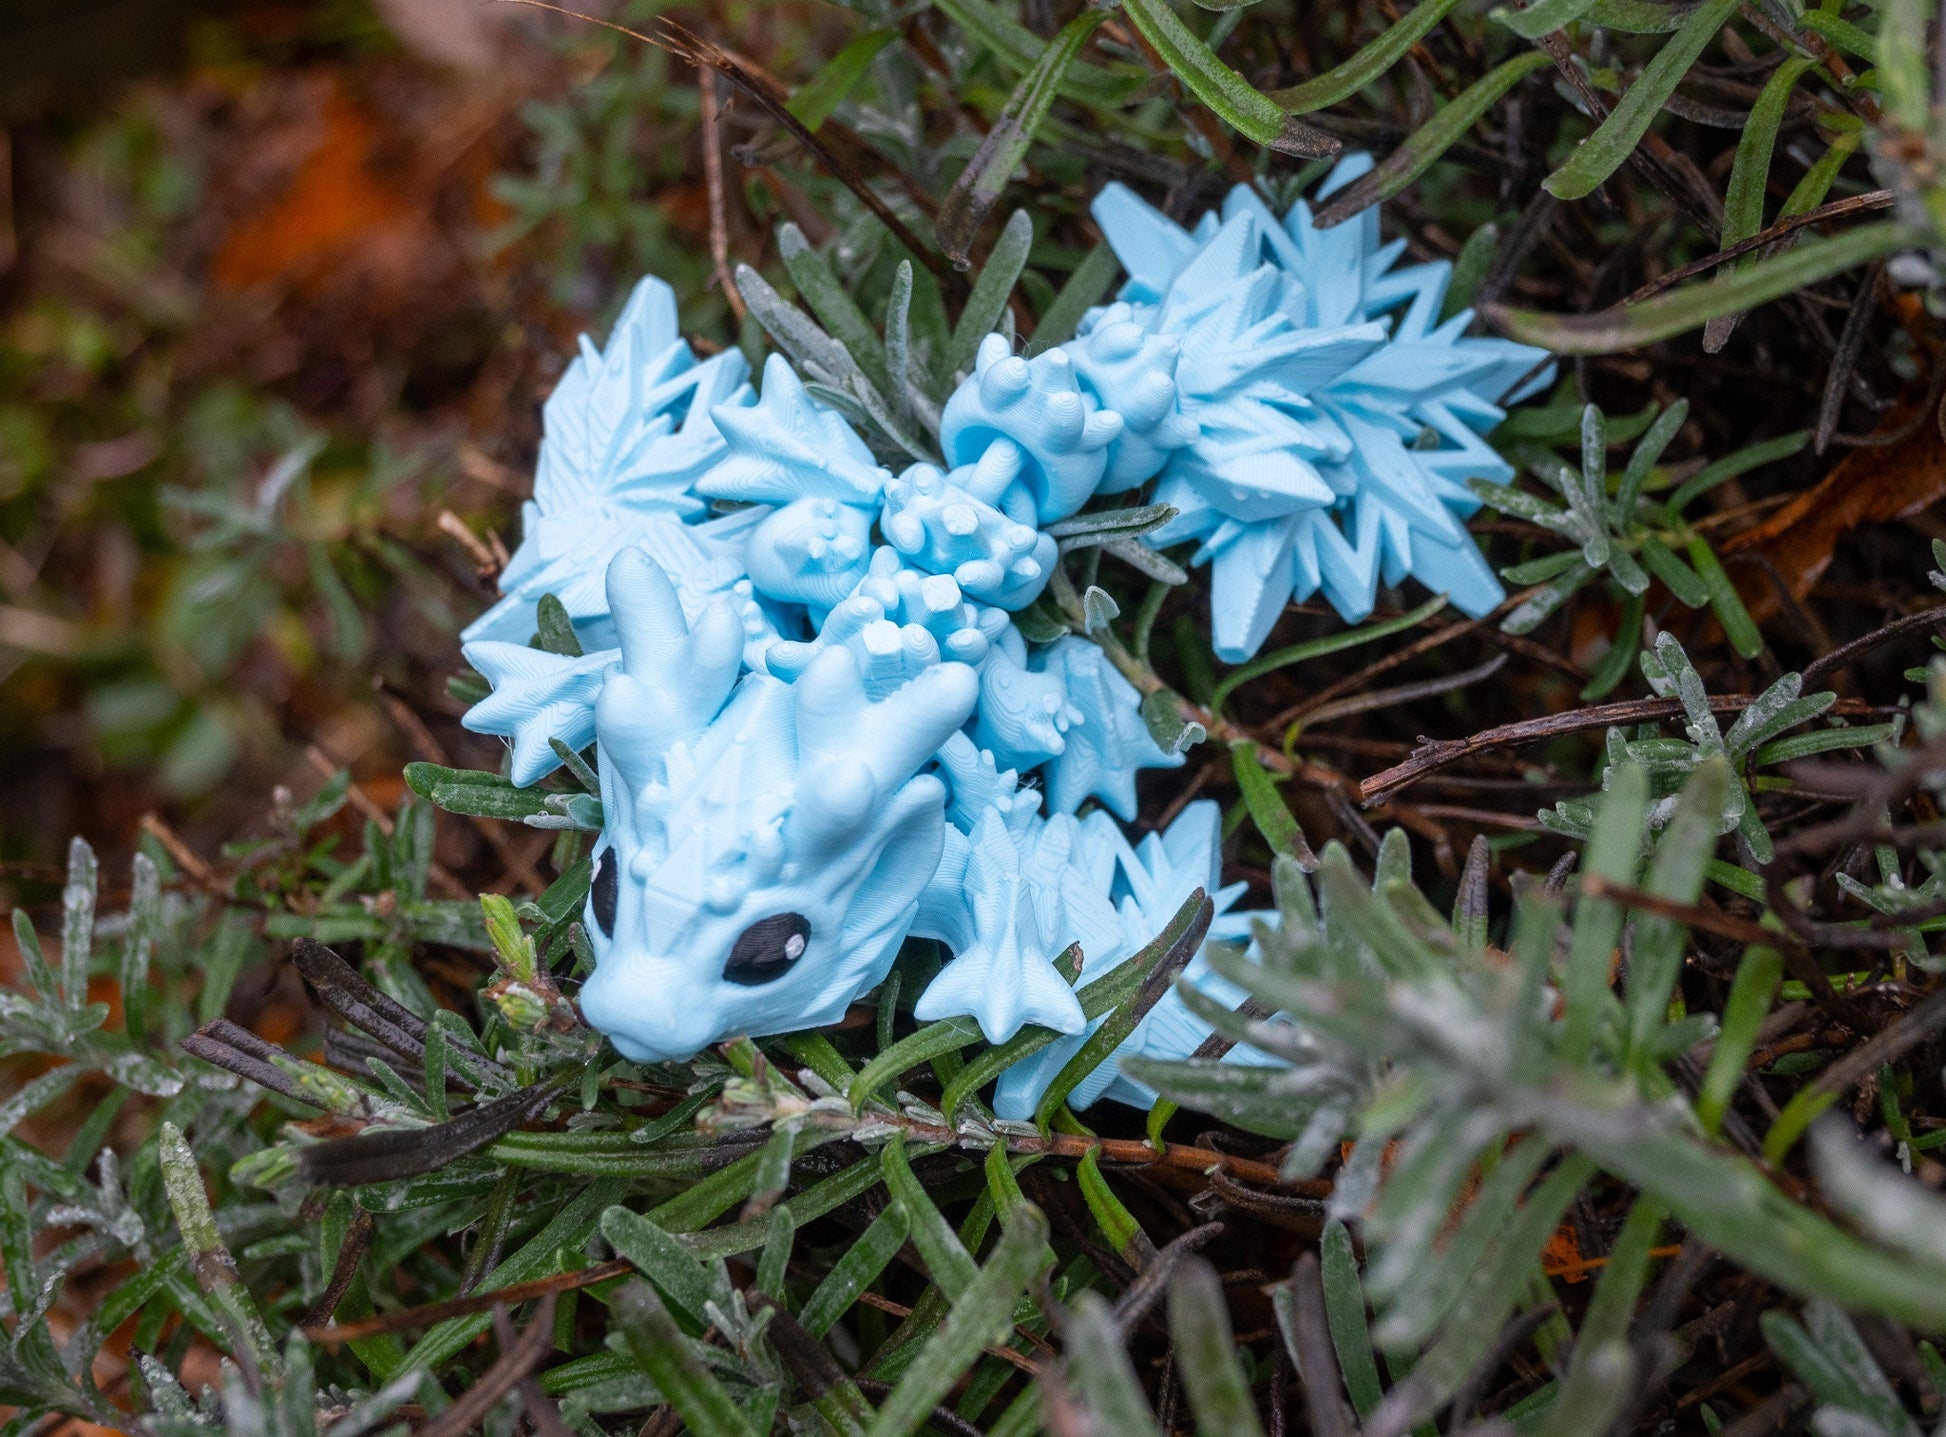 3D Printed Baby Snow Dragon - Articulating, Flexi Dragon Toy